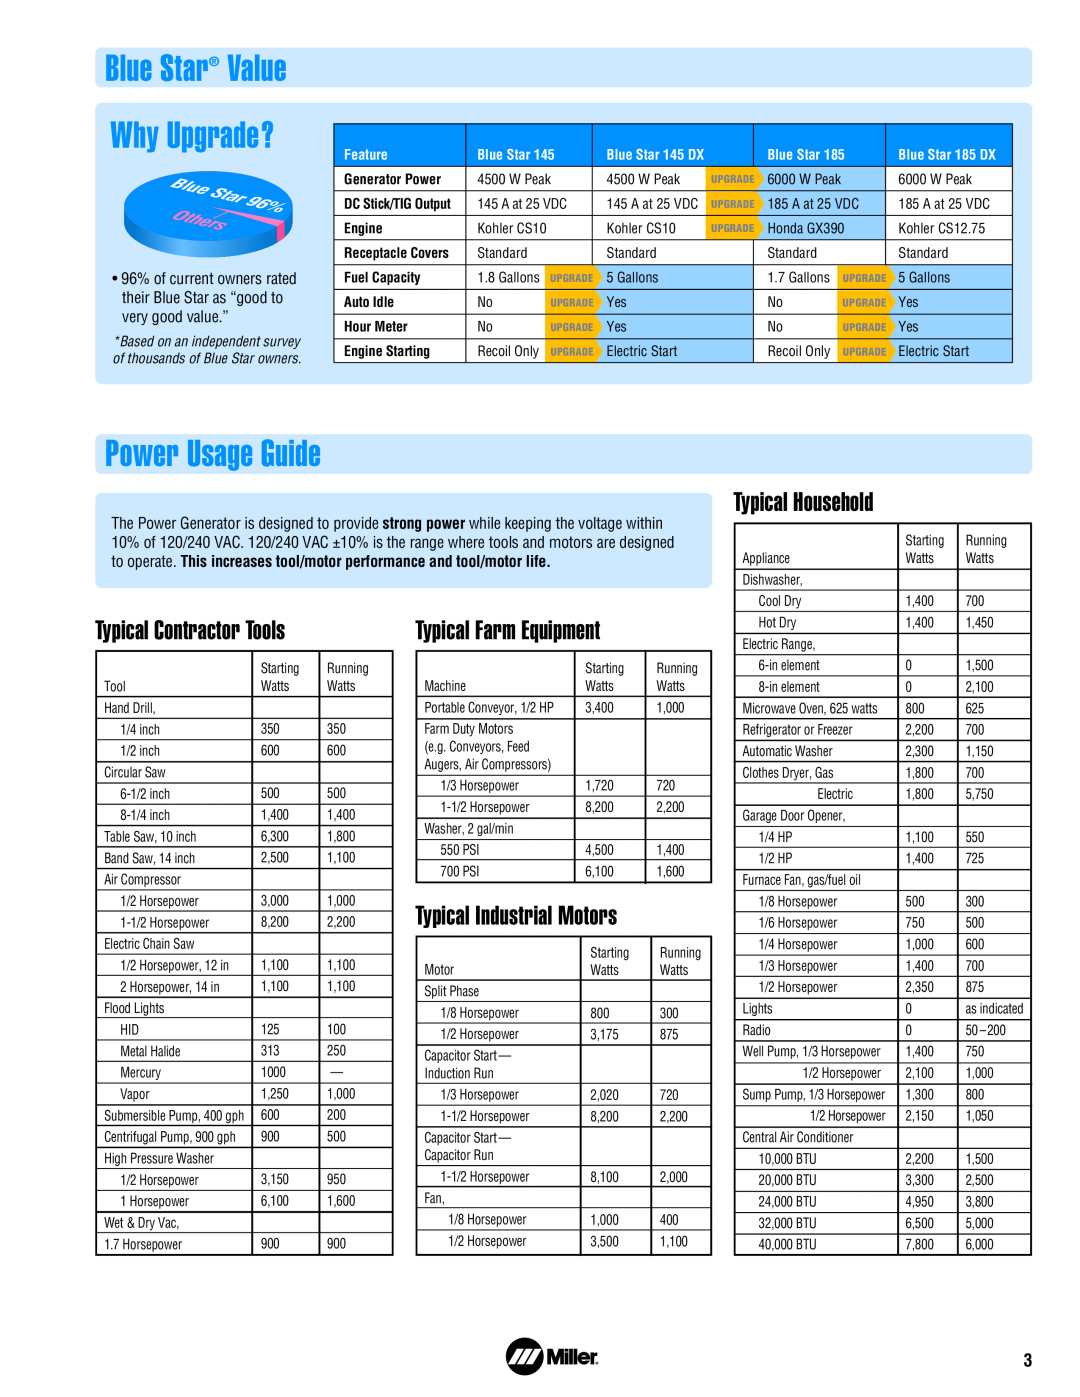 Miller Electric 145 Power Usage Guide, Typical Household, Typical Contractor Tools, Typical Farm Equipment, Blue, Star 